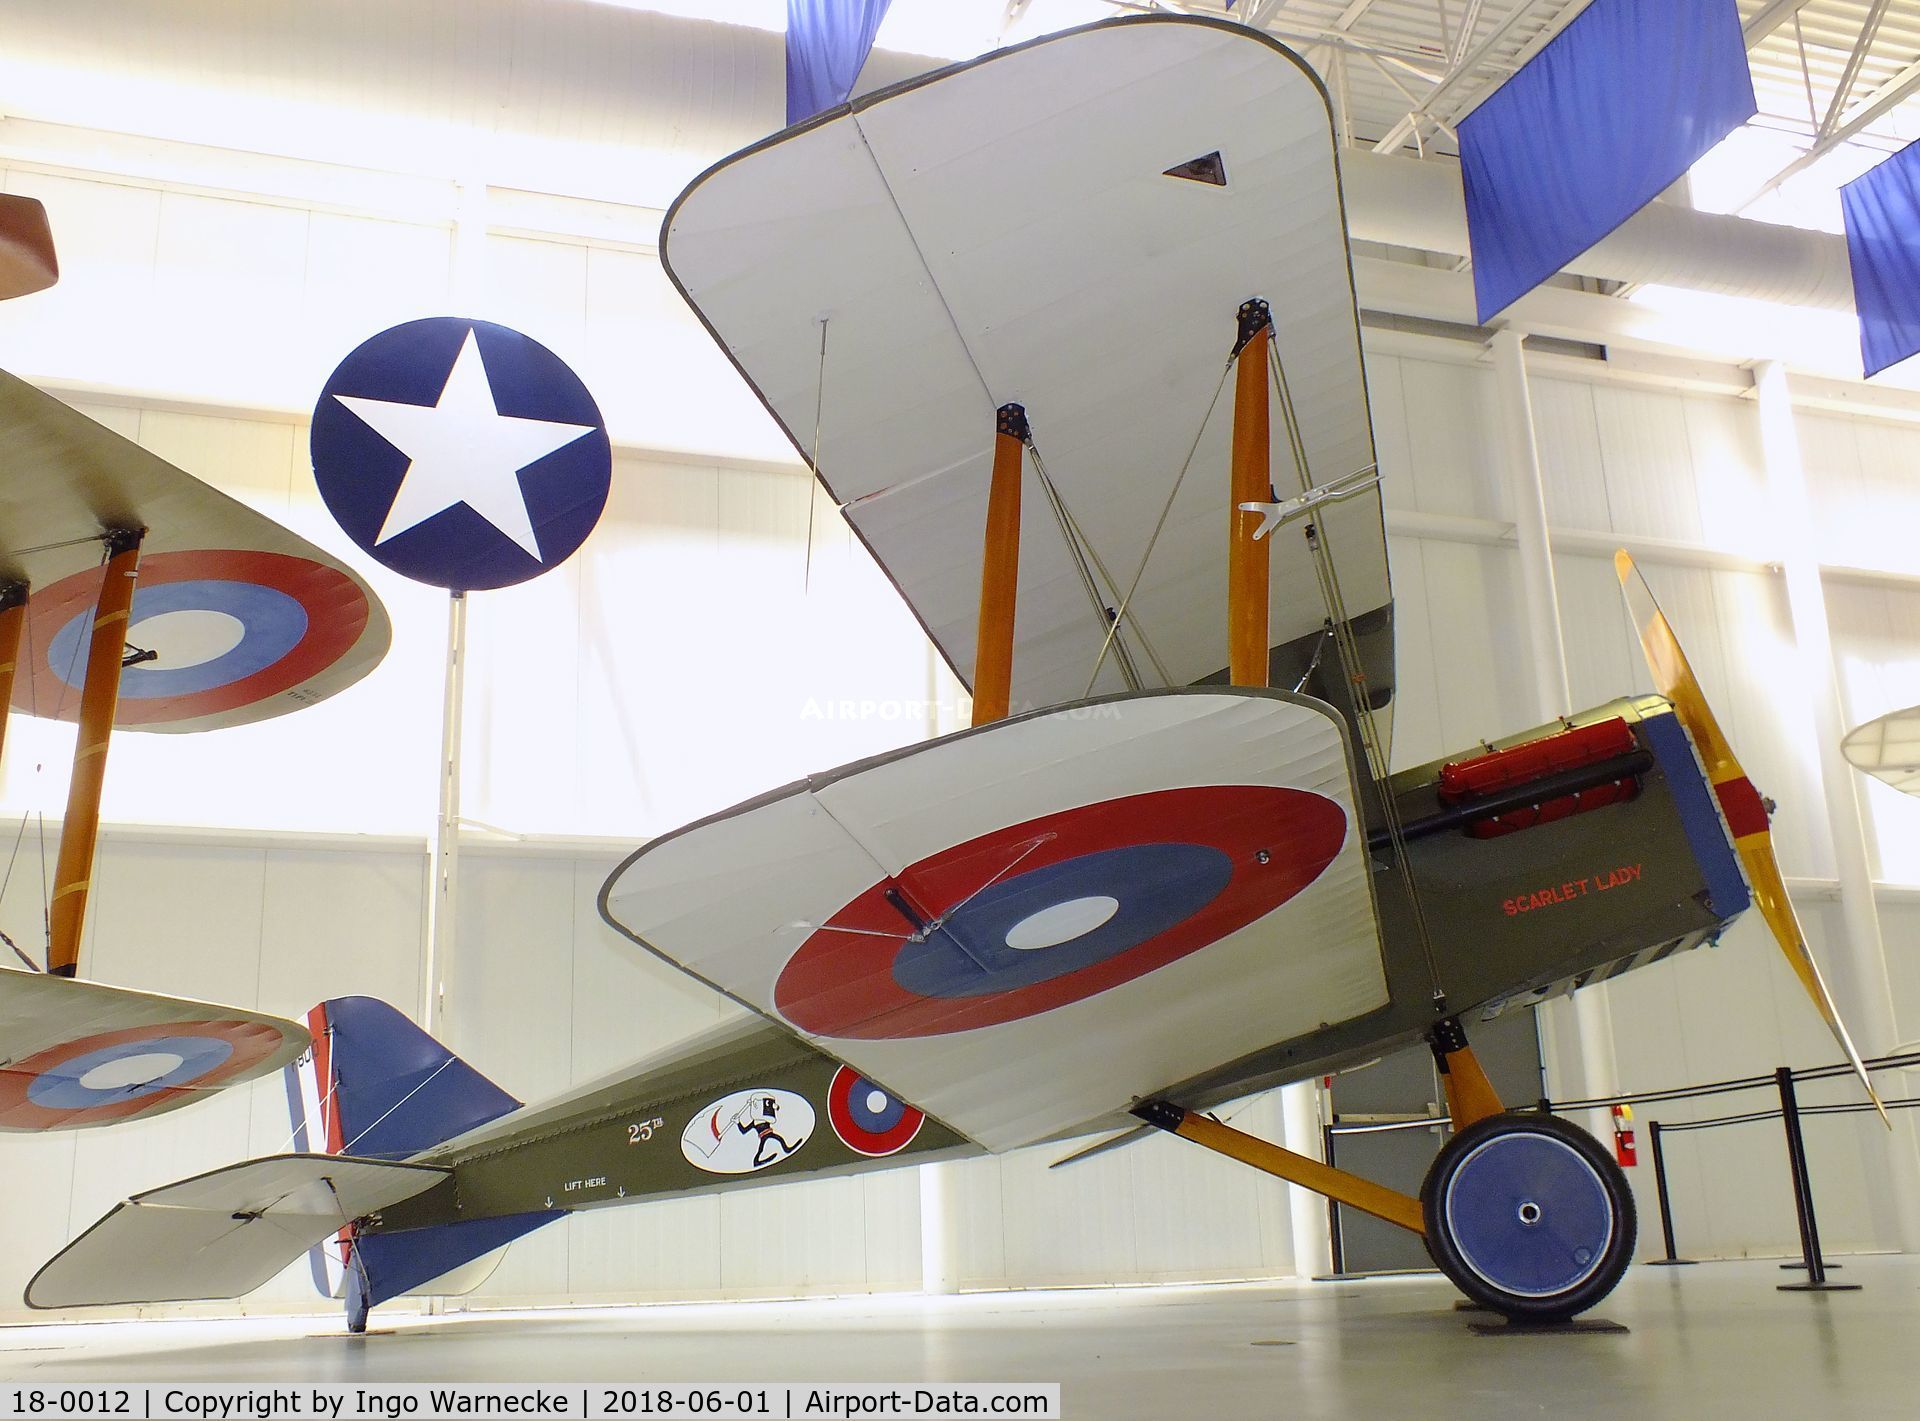 18-0012, 1918 Curtiss SE.5A C/N F8010, Royal Aircraft Factory (Curtiss) S.E.5A replica at the US Army Aviation Museum, Ft. Rucker